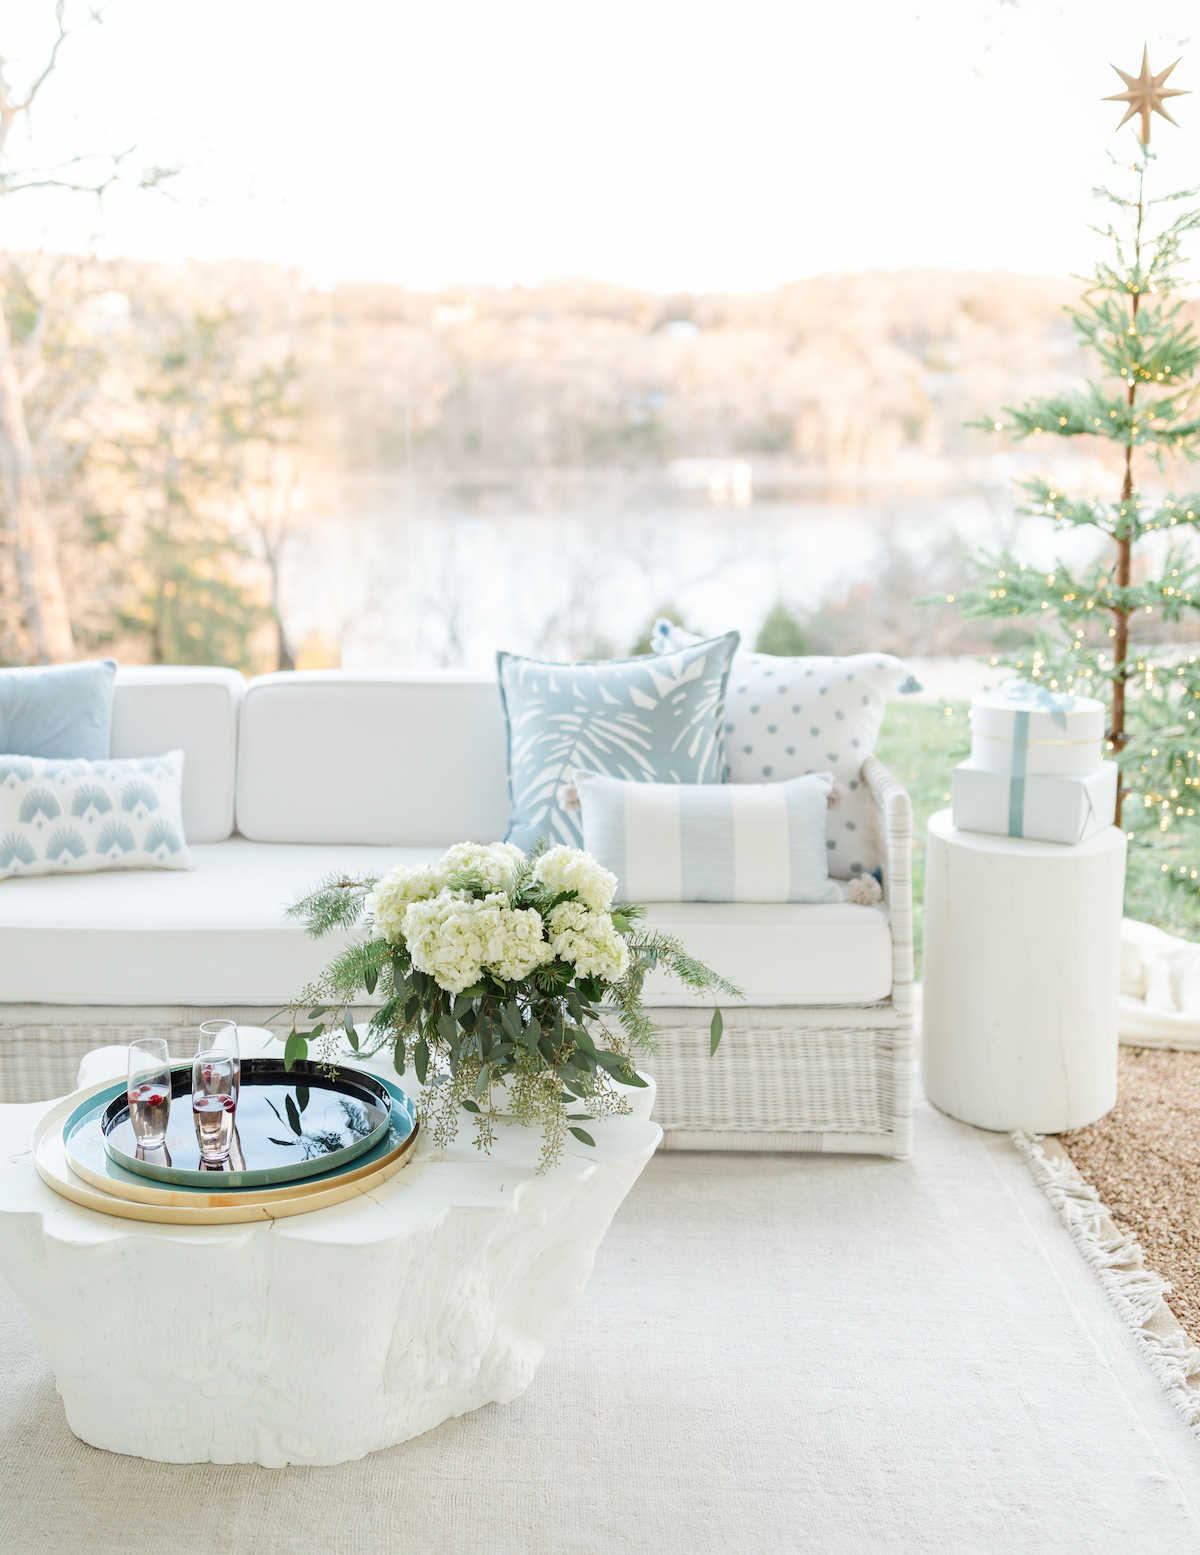 A festive outdoor living room adorned with a beautifully decorated Christmas tree, showcasing a harmonious blend of white and blue hues.